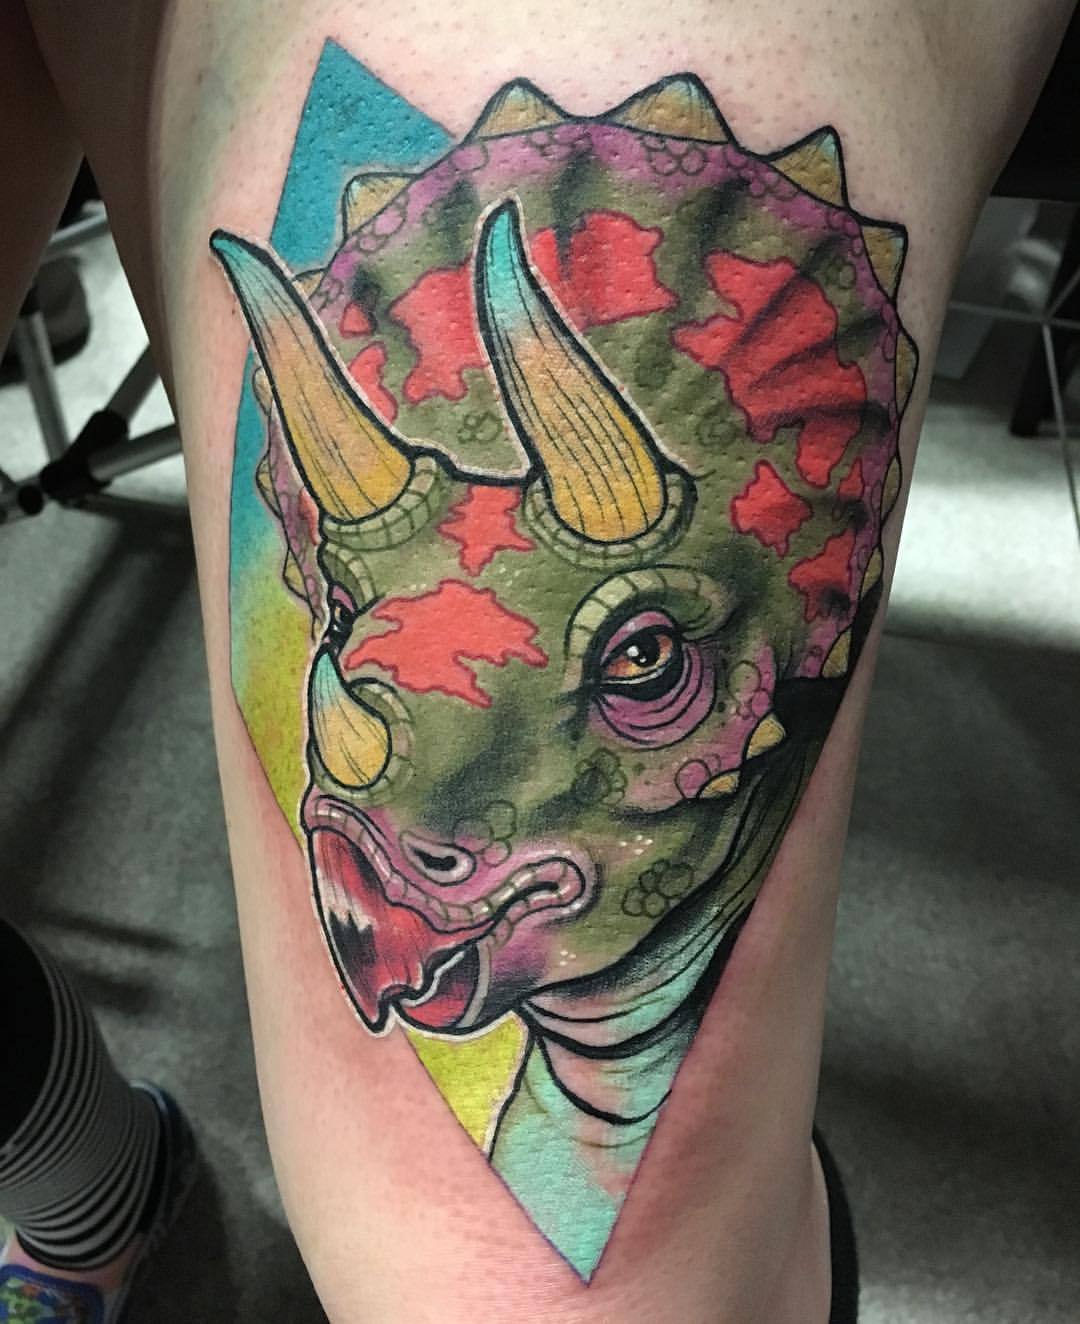 More stuff and things — I got to tattoo this fun triceratops at...